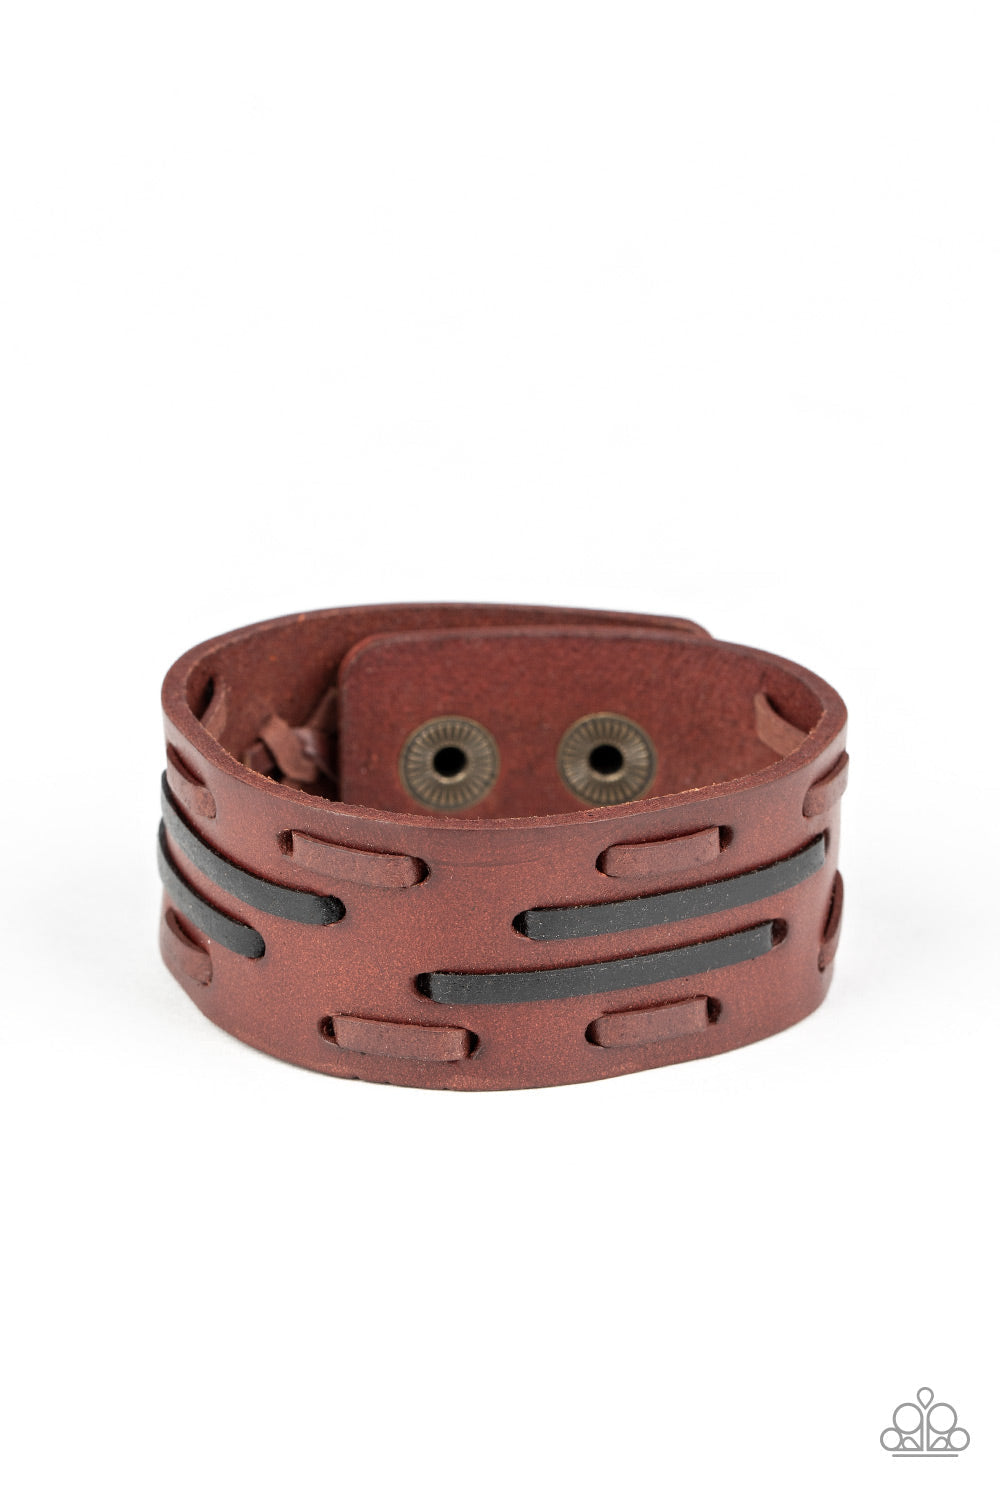 Cowboy Boot Camp - Brown Leather Men's Bracelet - Paparazzi Accessories - Brown and black leather laces are haphazardly threaded through a thick brown leather band, creating a rustic display around the wrist. Features an adjustable snap closure.